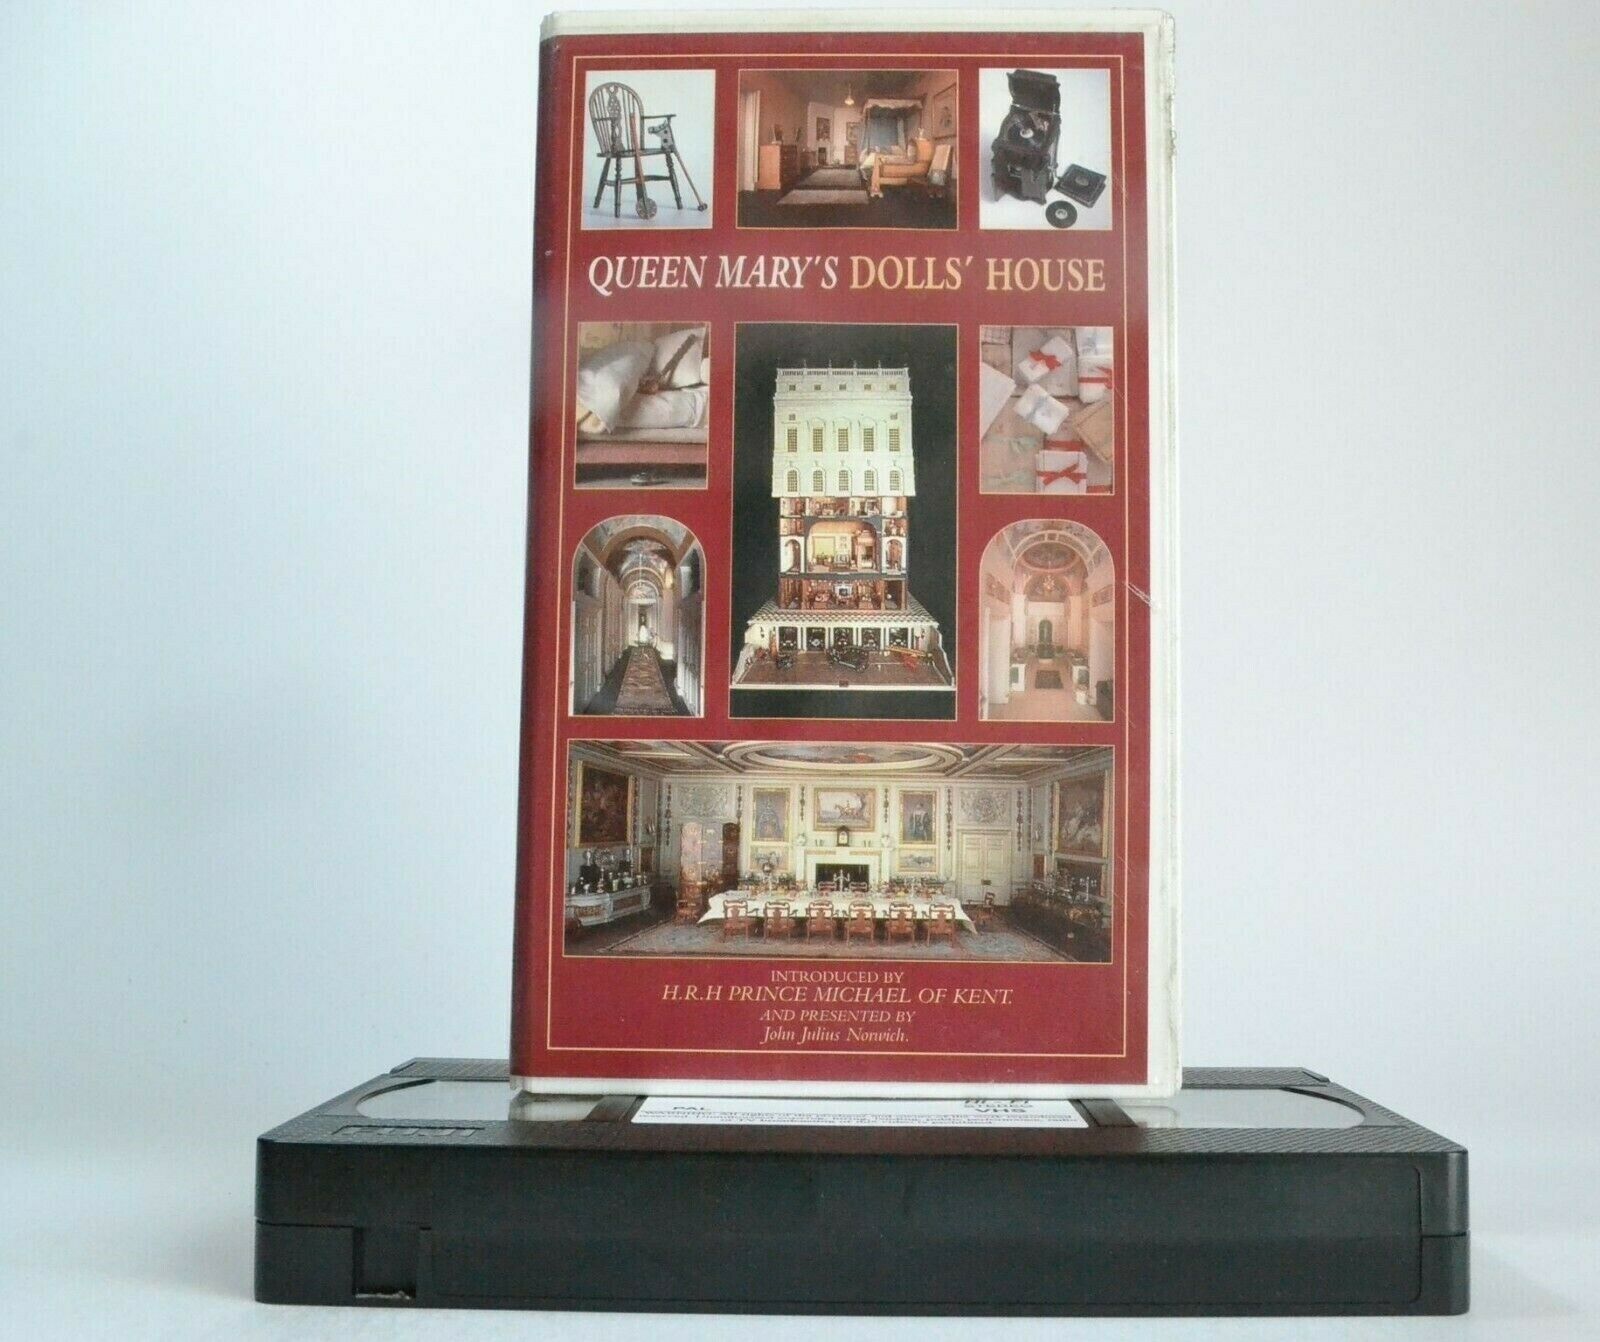 Queen Mary's Dolls' House: By John Julius Norwich - Stately Home Design - VHS-